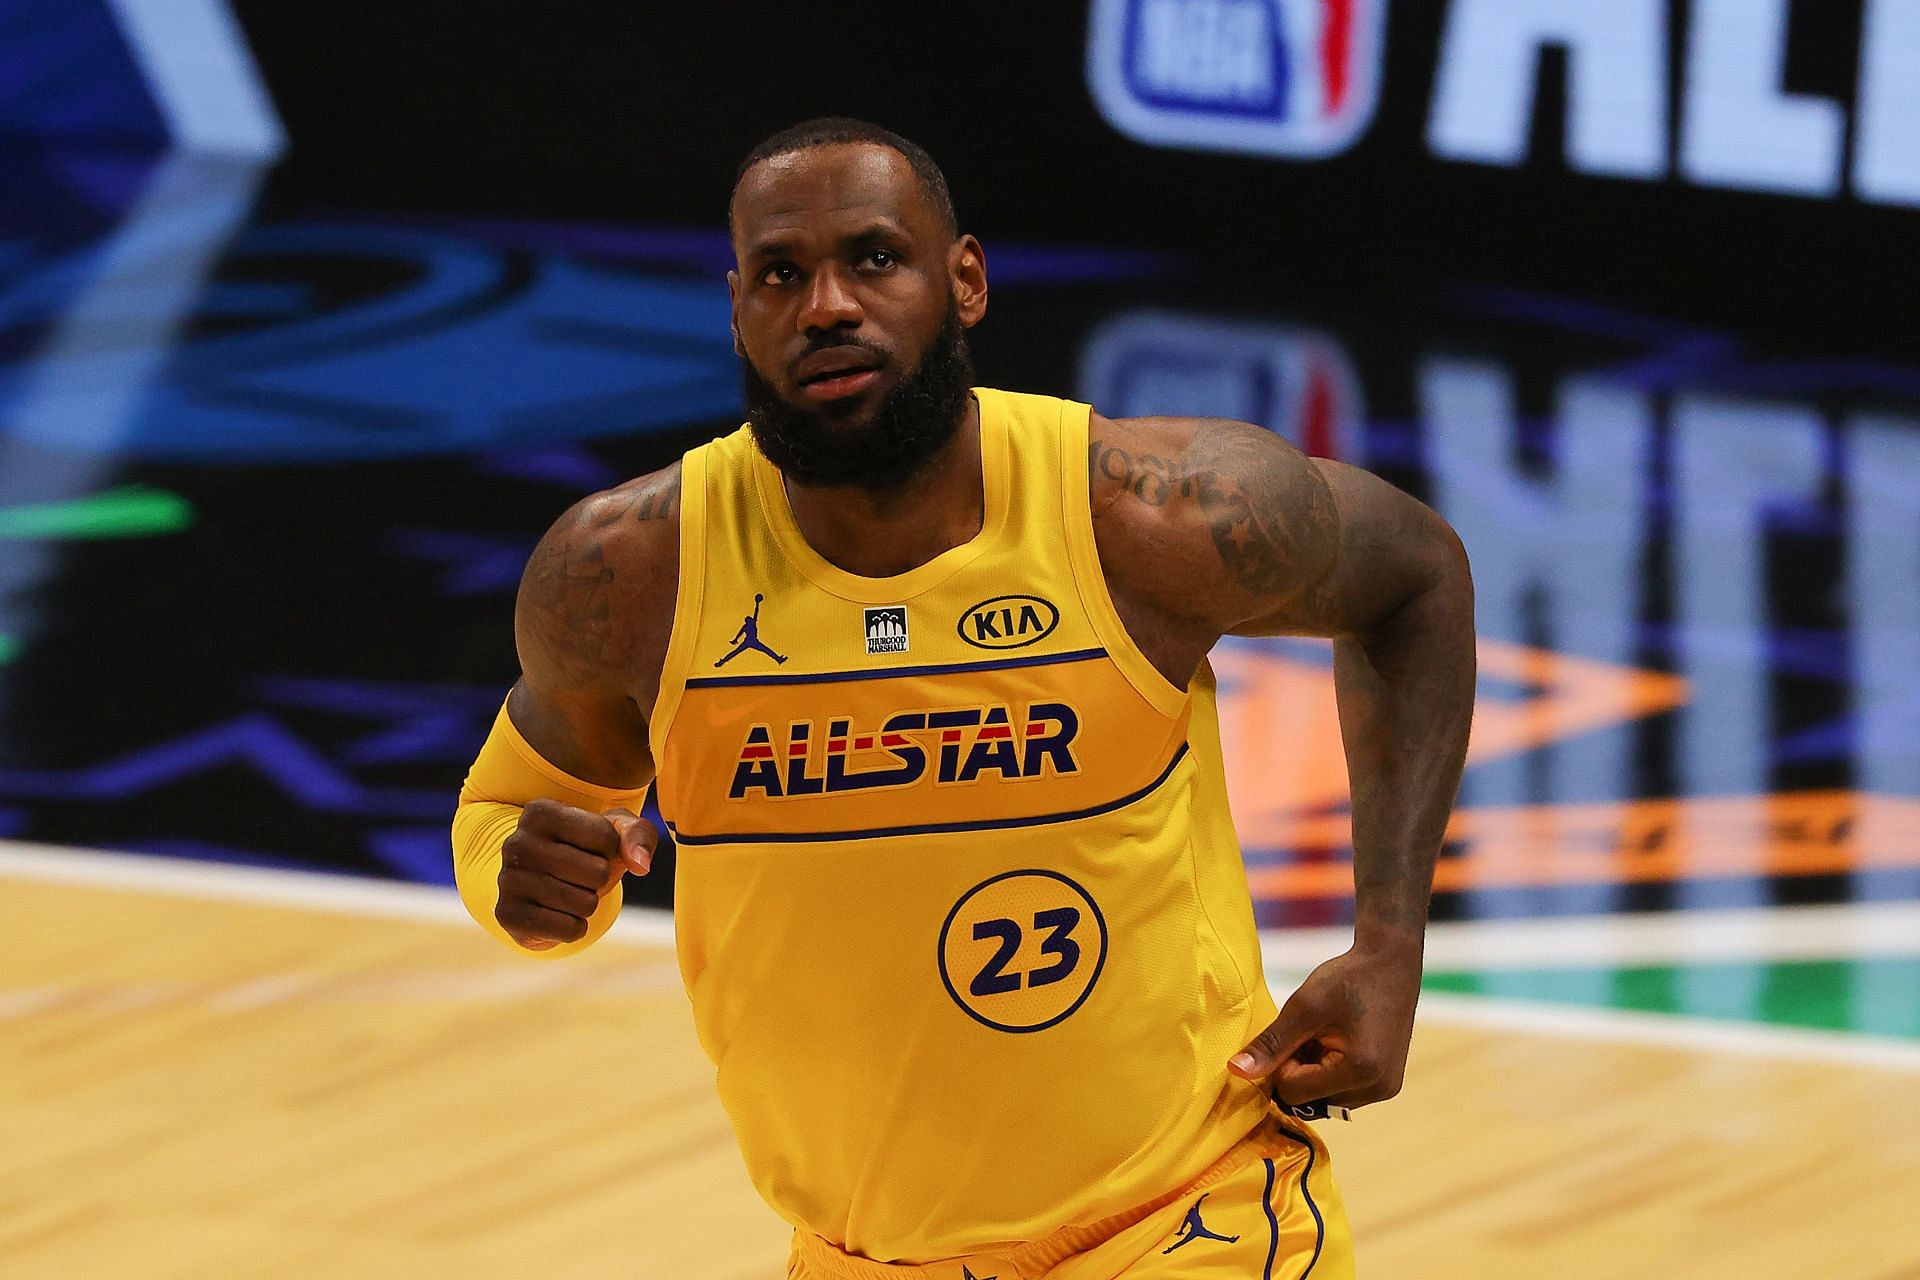 LeBron James during the 2021 NBA All-Star Game in Atlanta